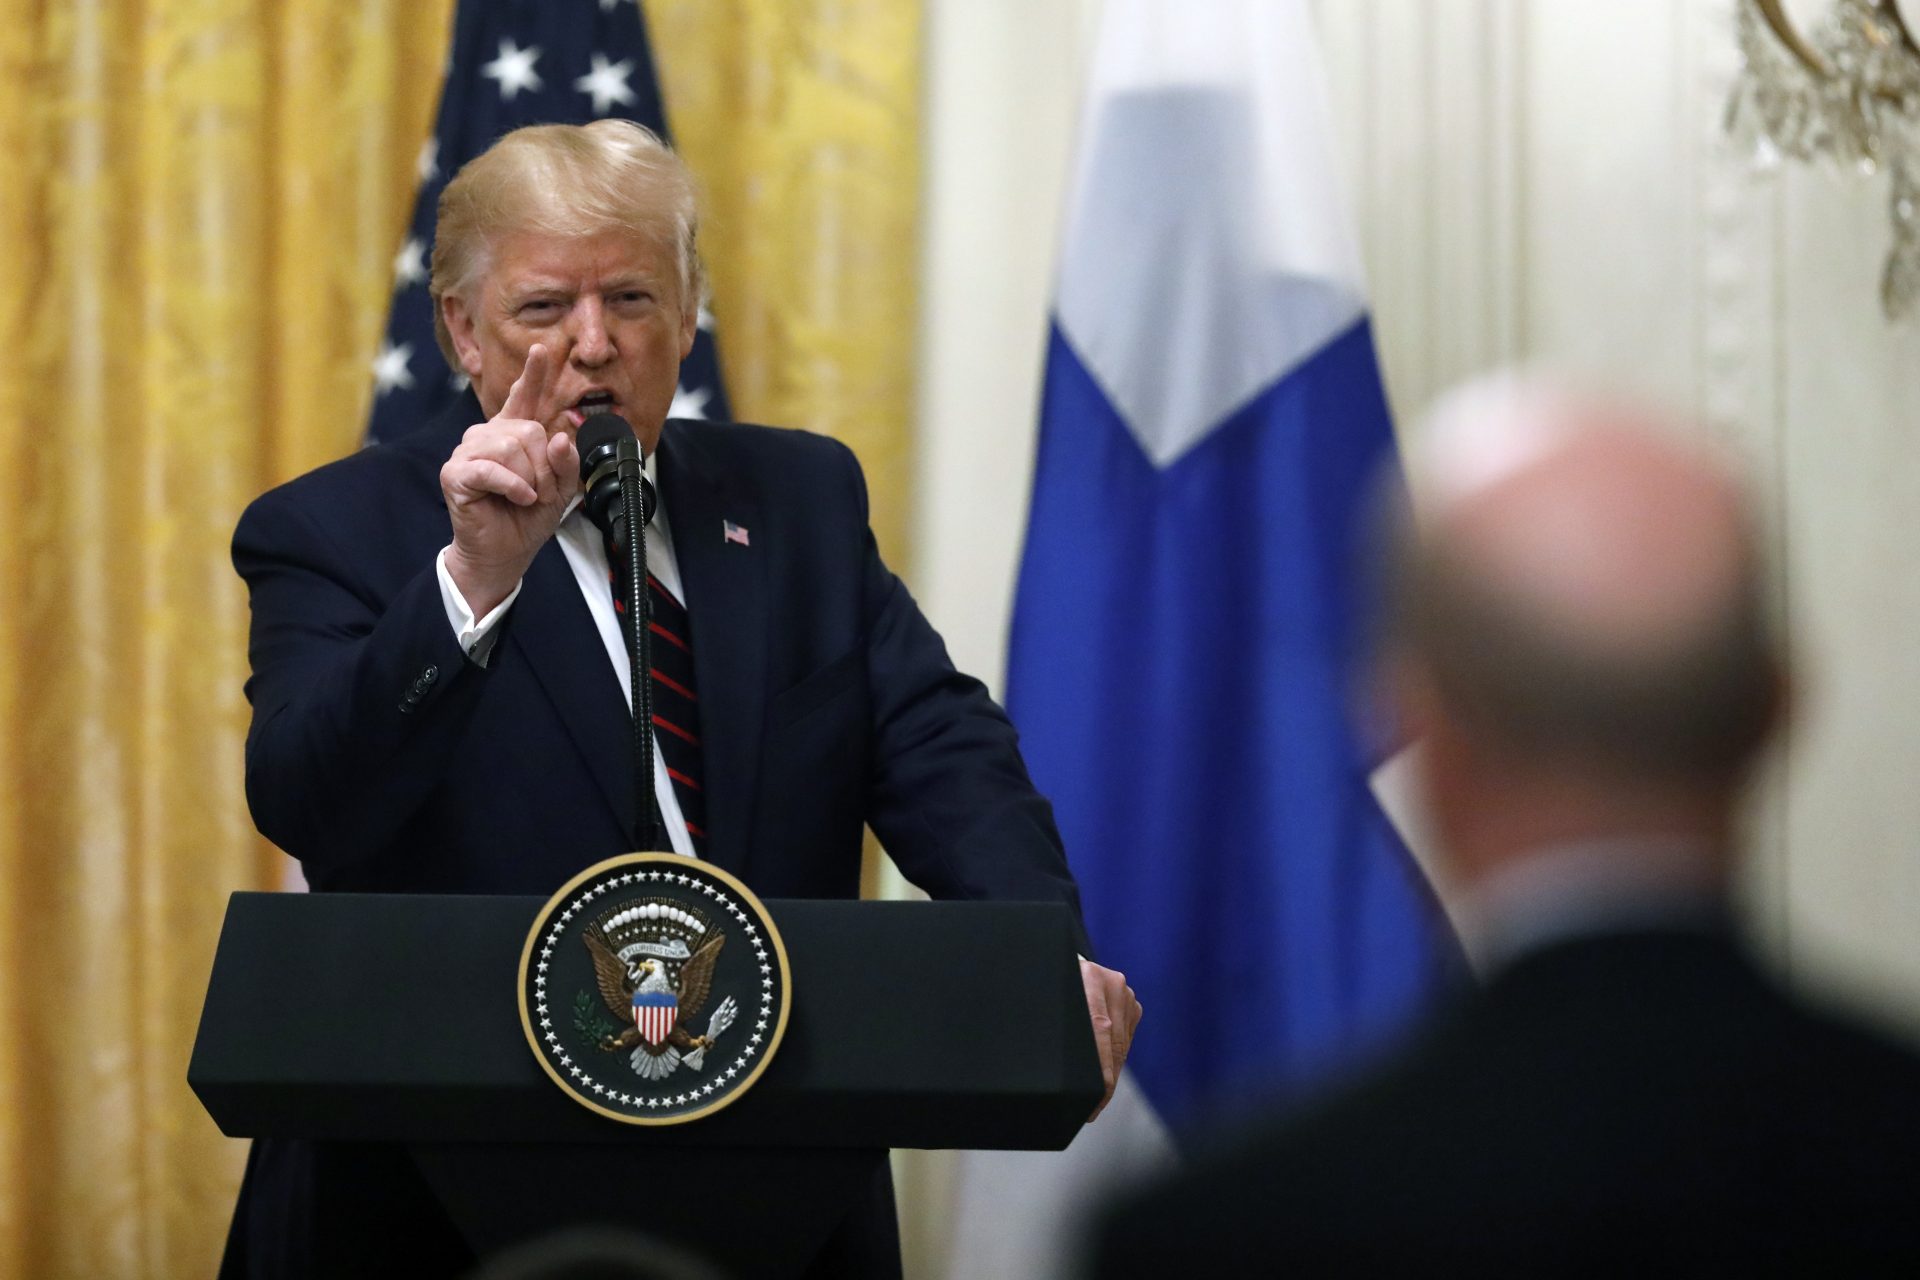 President Donald Trump speaks during a news conference with Finnish President Sauli Niinisto at the White House in Washington, Wednesday, Oct. 2, 2019.